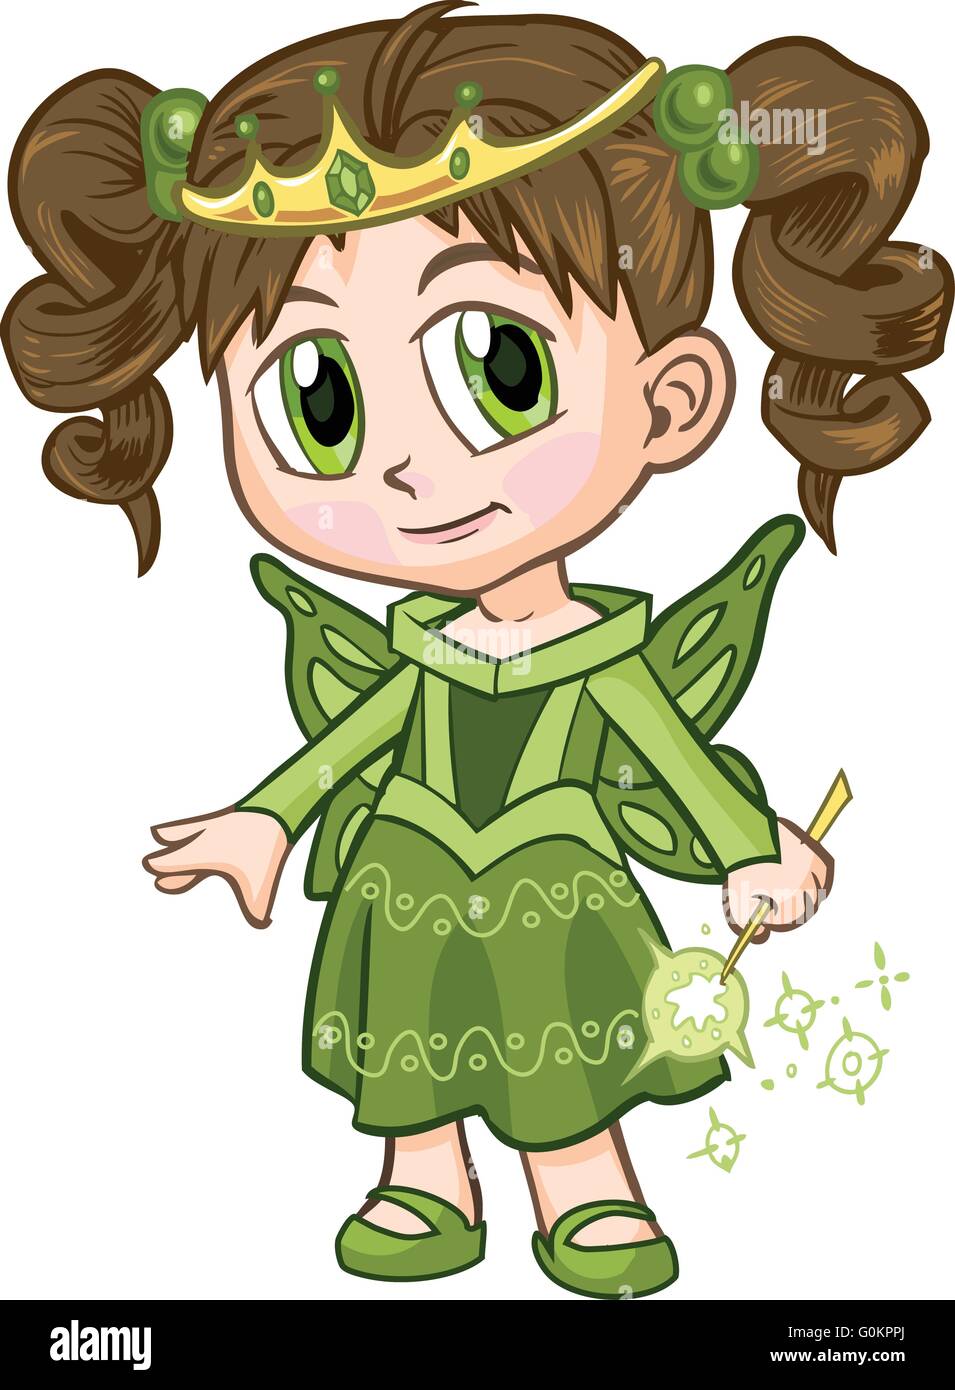 Vector clip art illustration of a brown haired girl wearing a fairy princess costume, drawn in an anime or manga style. Stock Vector